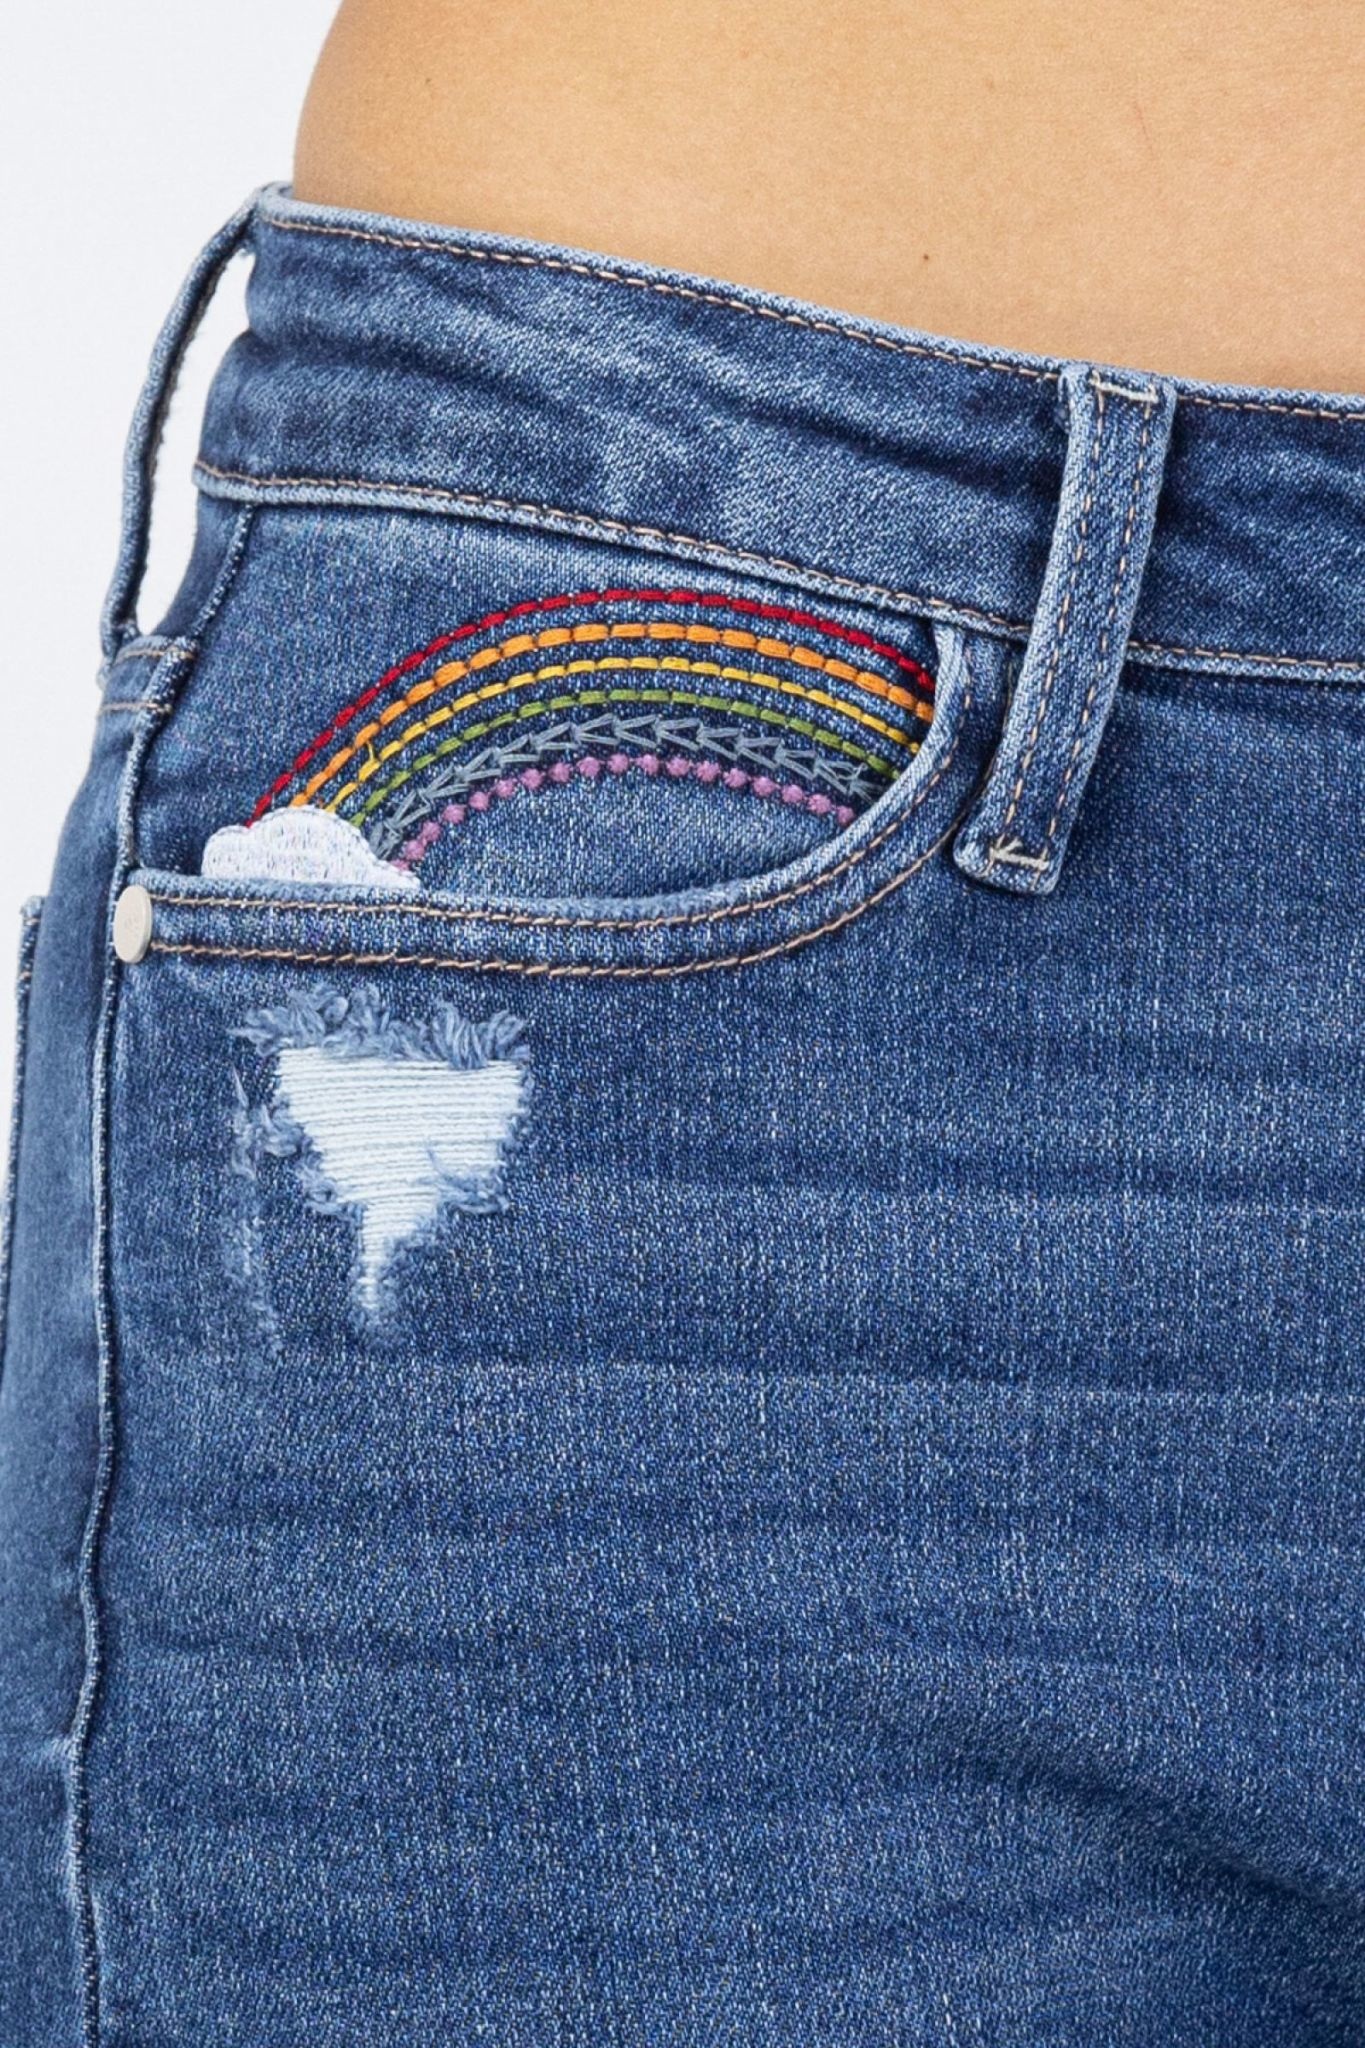 HI-Rise Rainbow Embroidery Crop Jeans